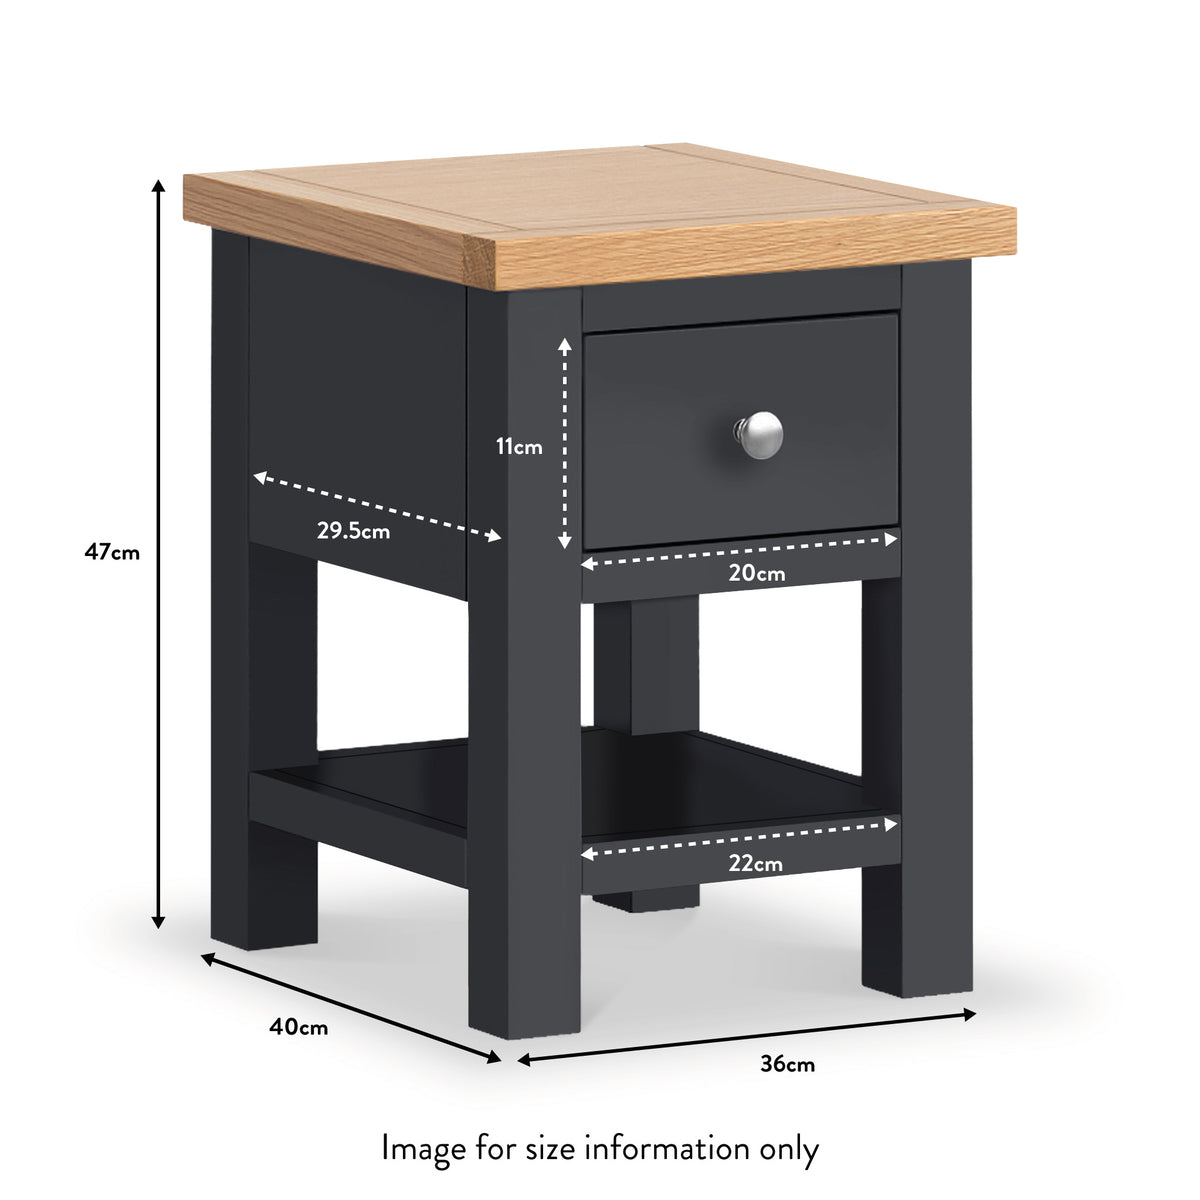 Farrow Side Lamp Table dimensions